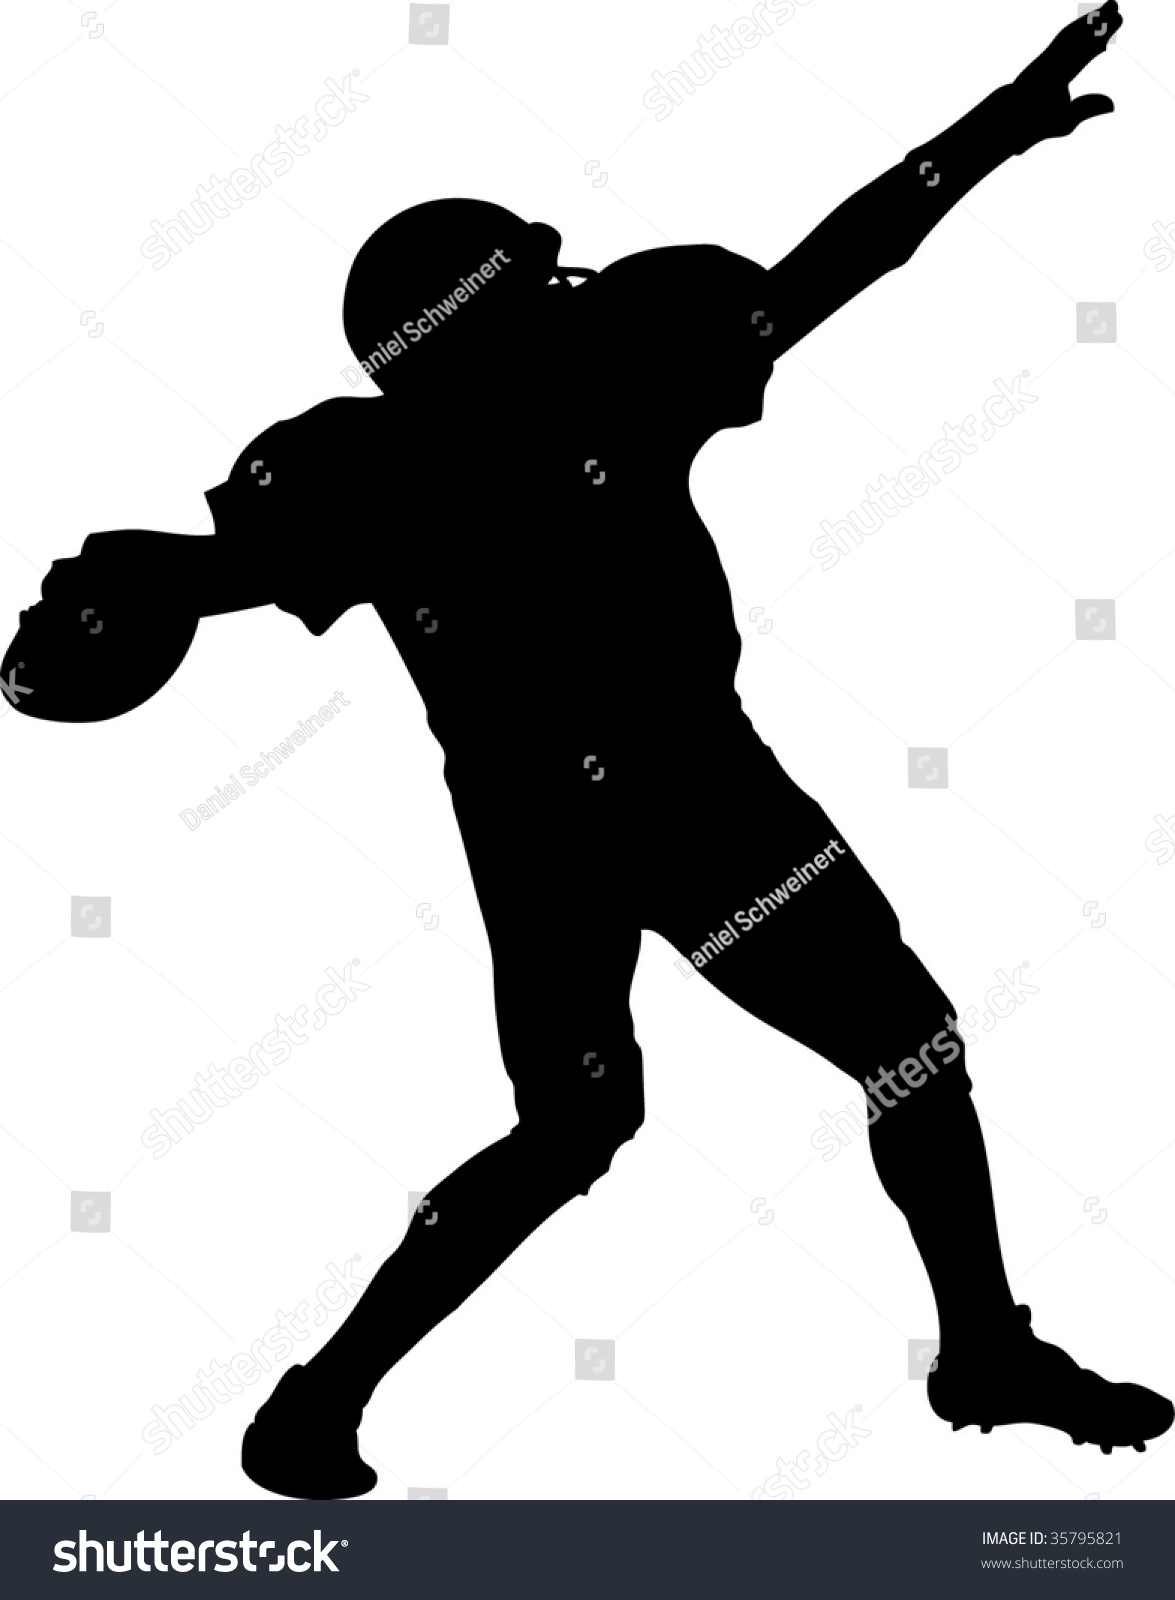 American Football Player Throwing A Ball Stock Vector Illustration ...